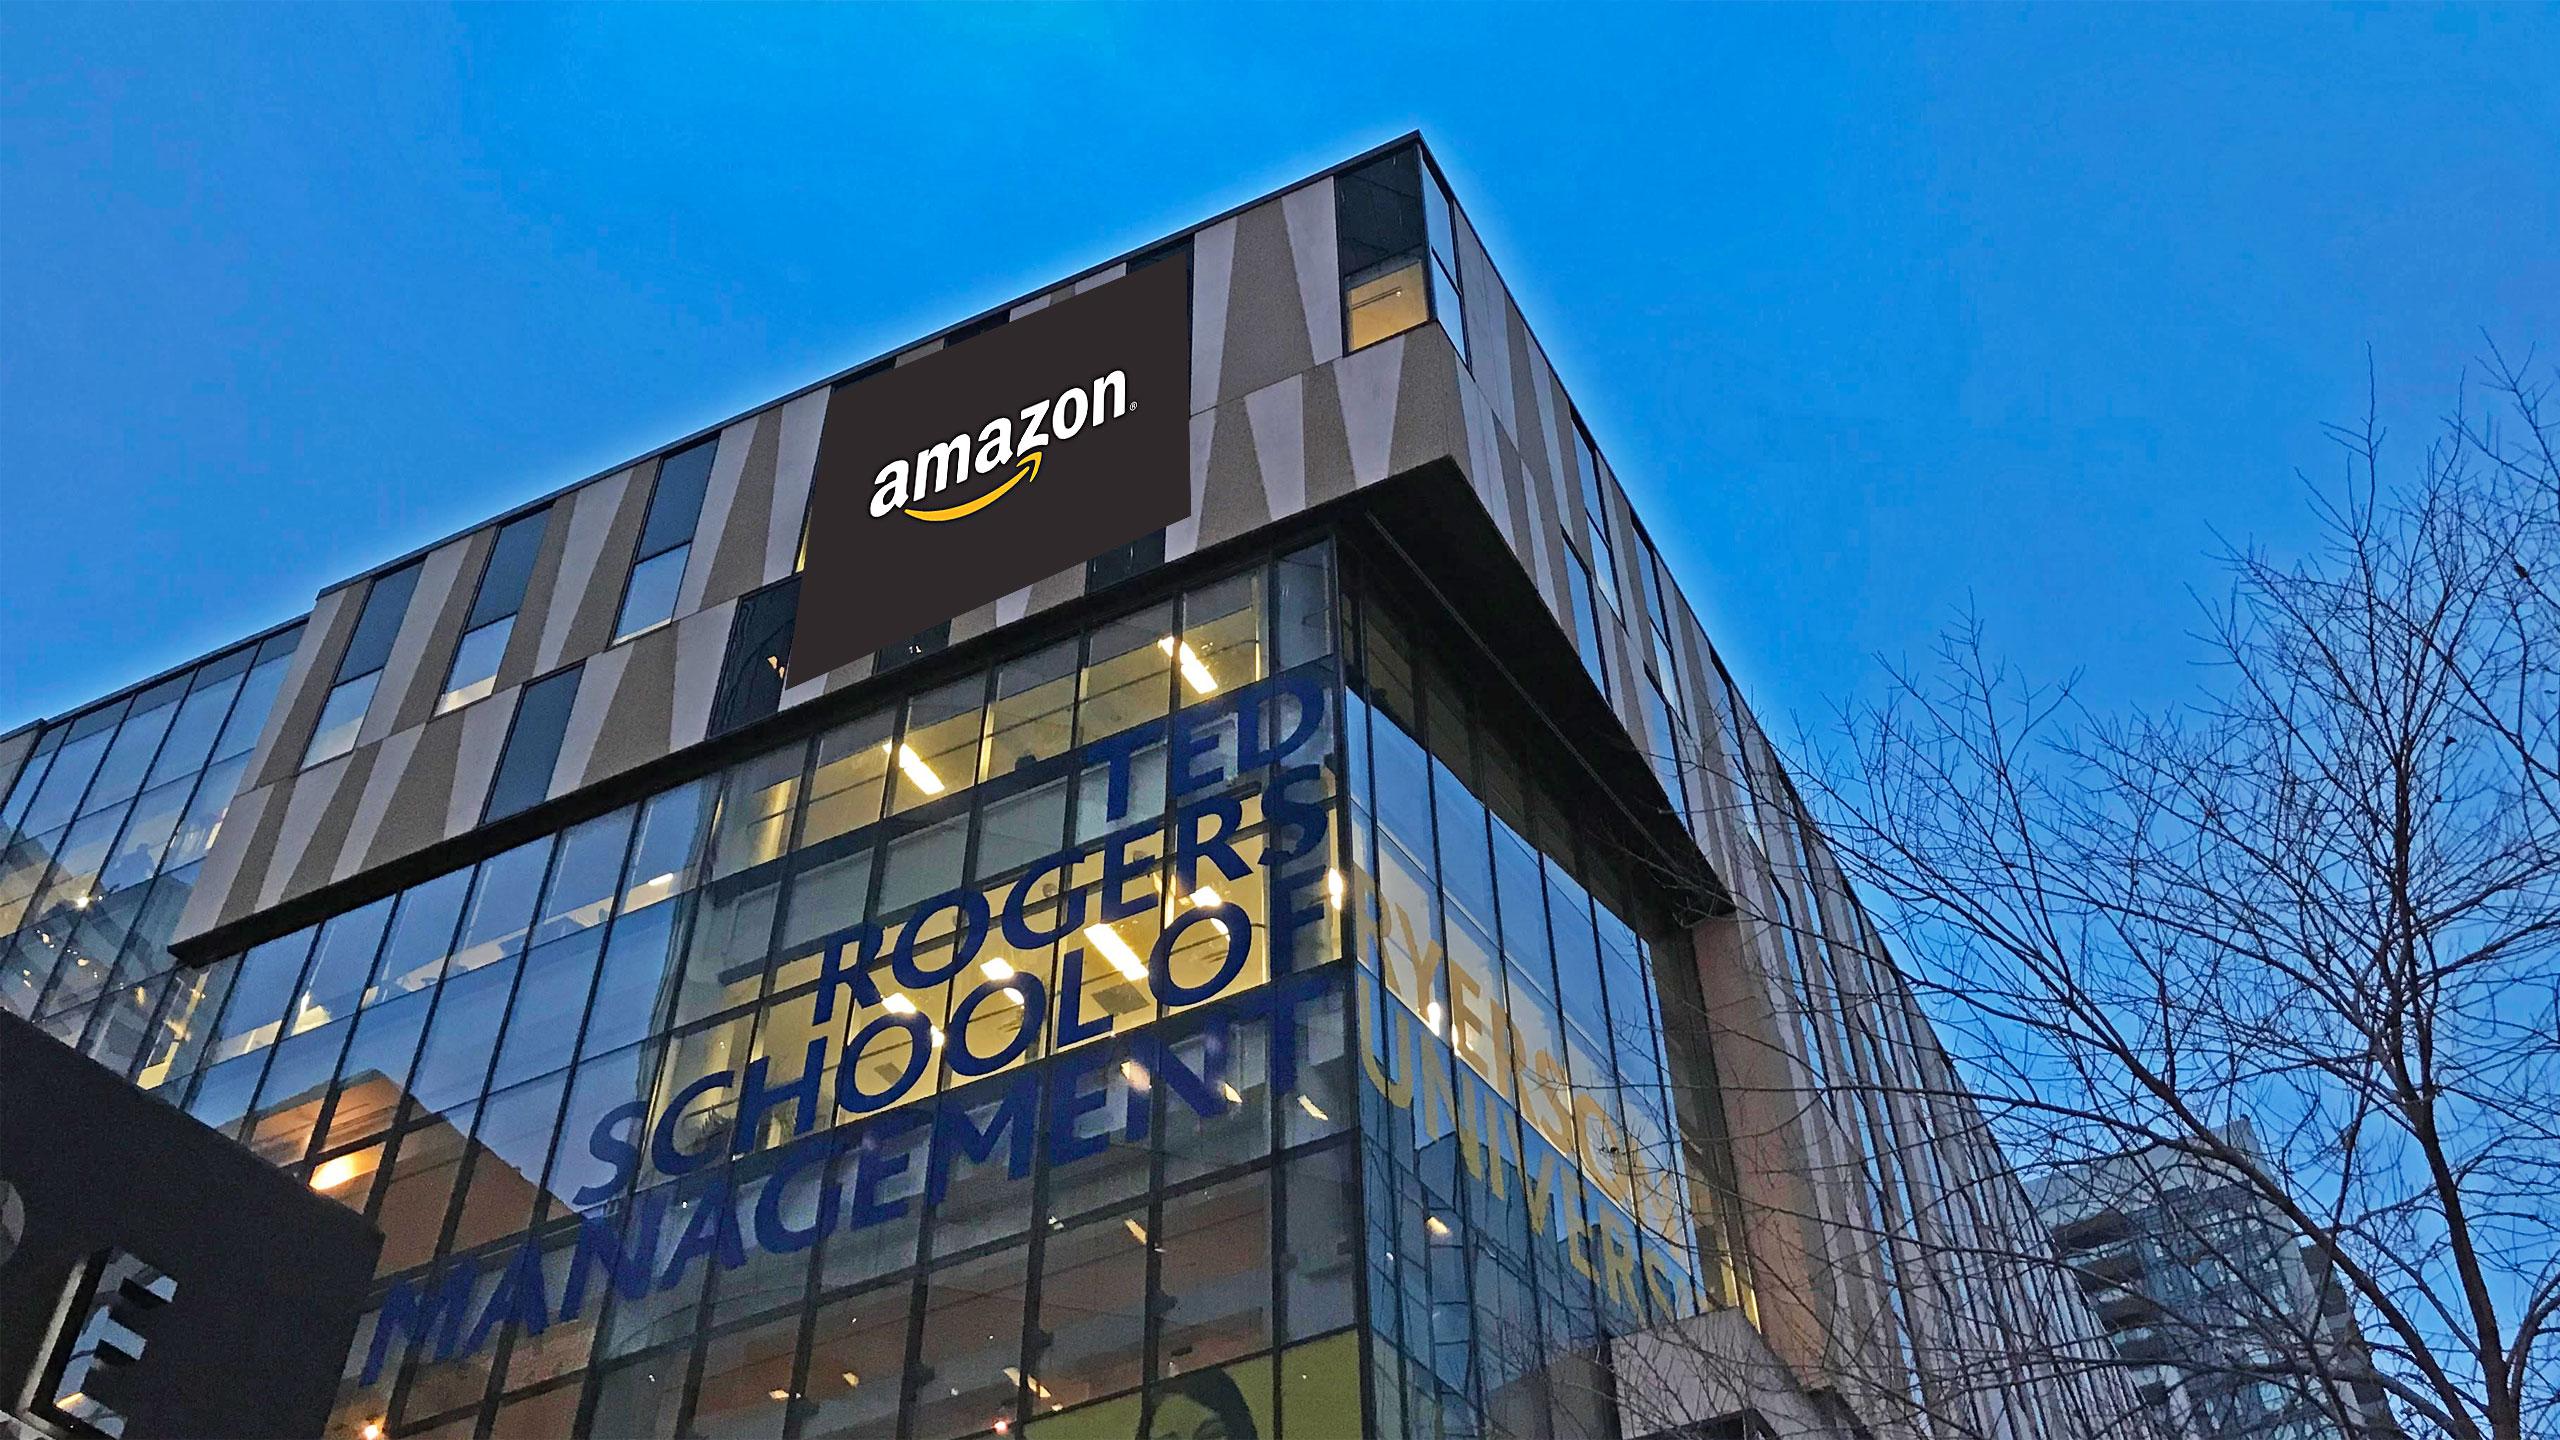 The Ted Rogers School of Management building with the amazon logo on the side